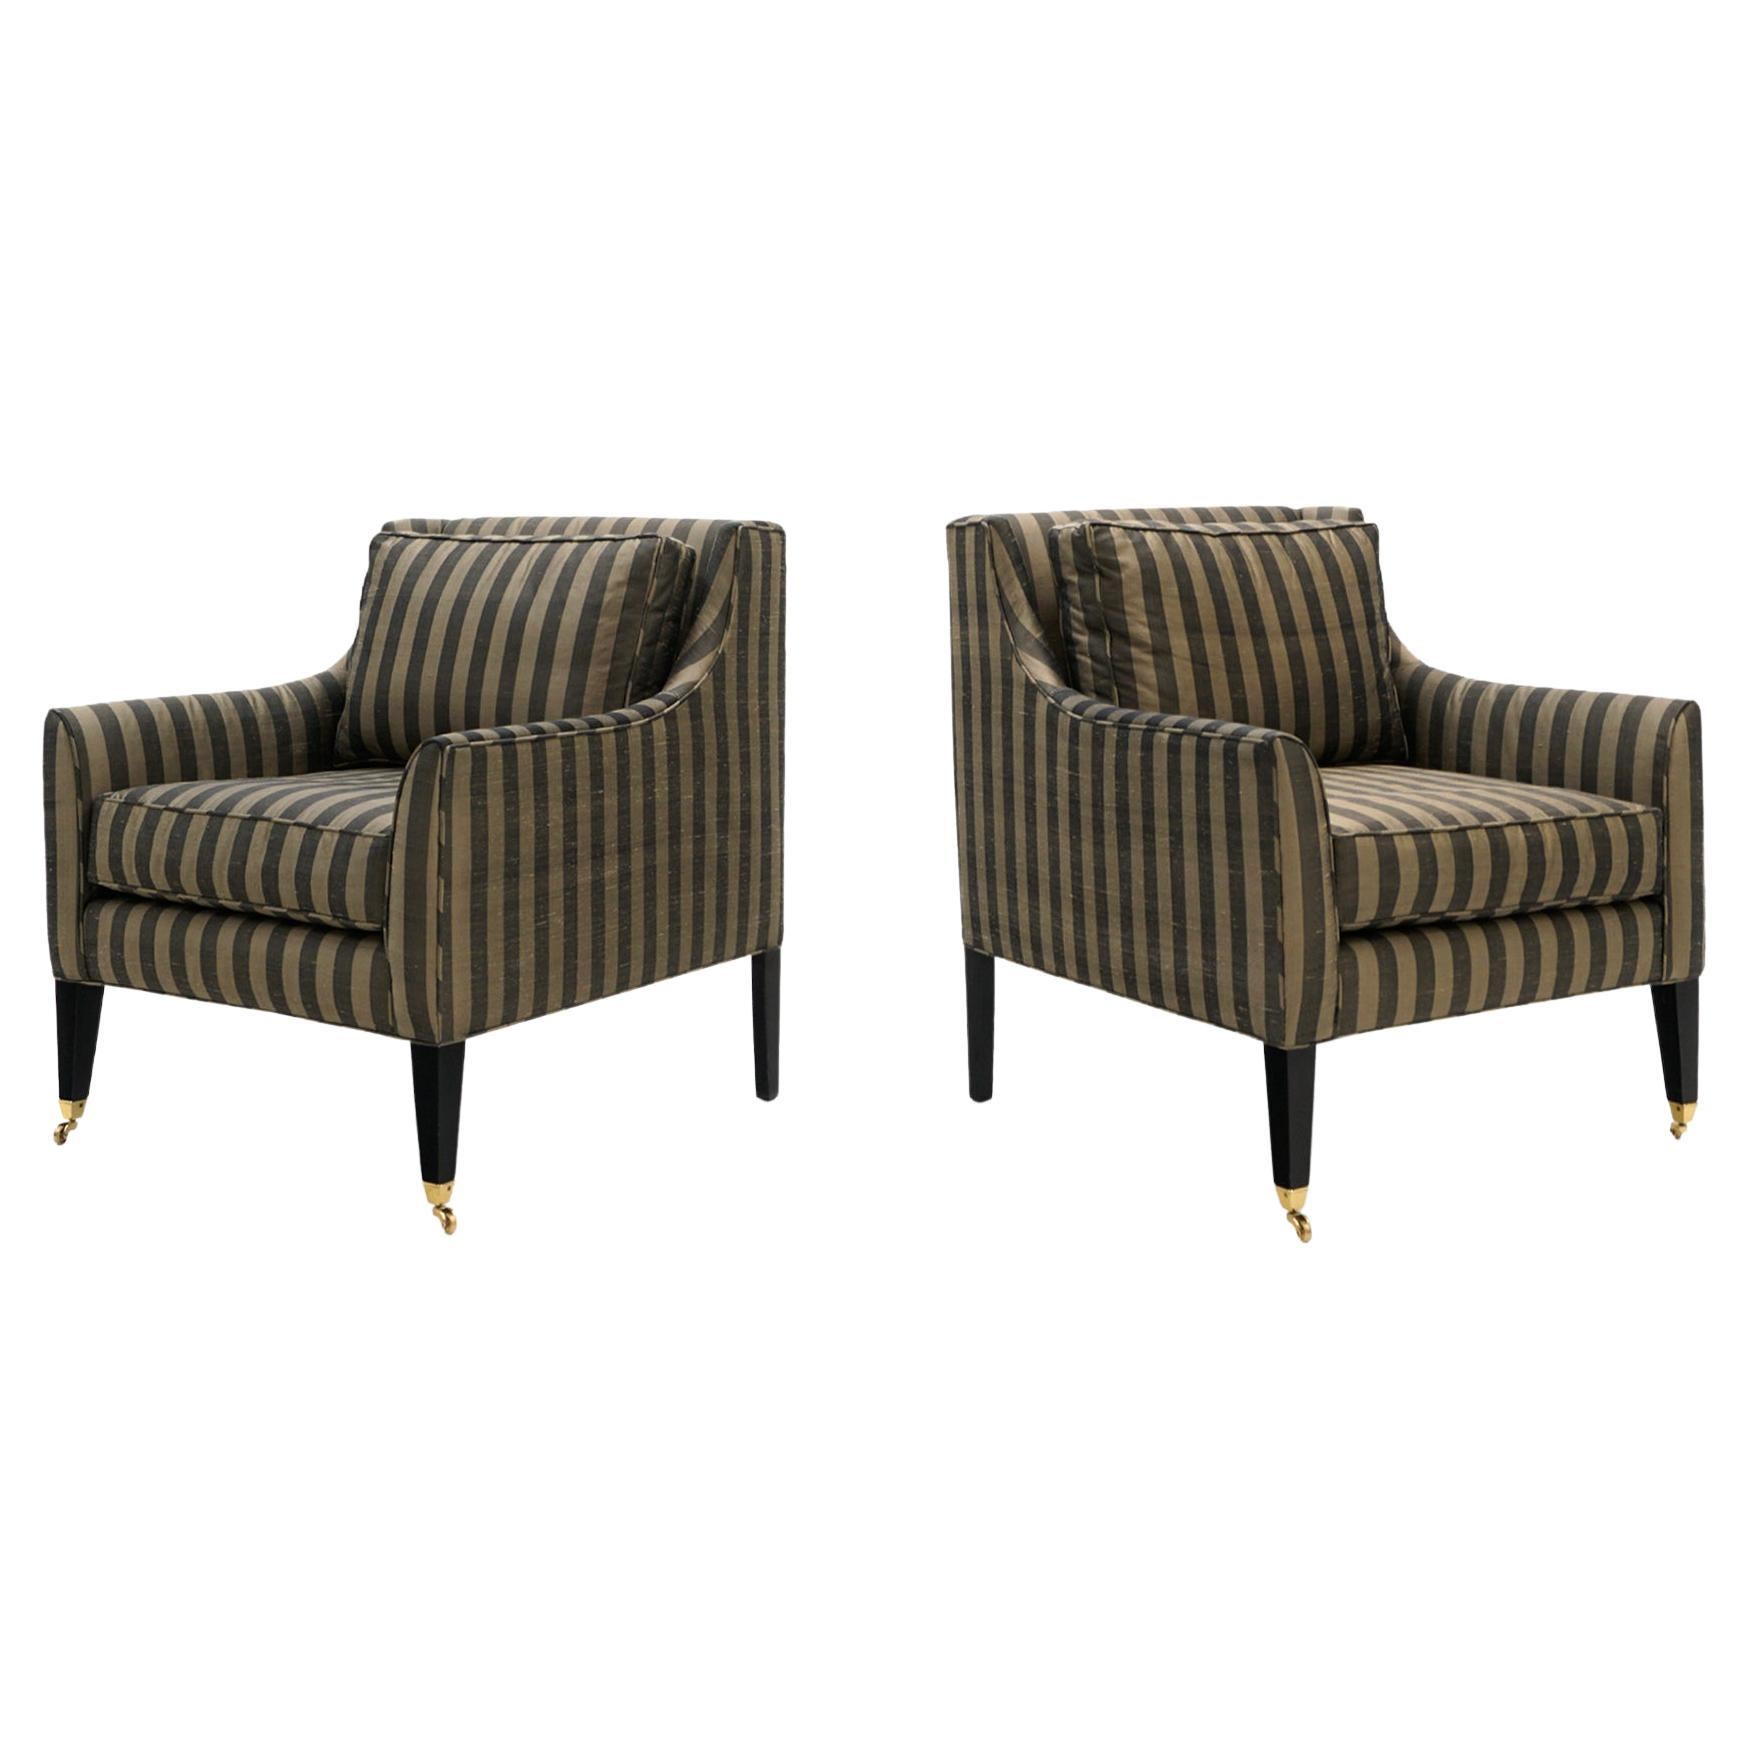 Pair of Lounge Chairs in Tan and Gray Stripes in the Style of Dunbar For Sale